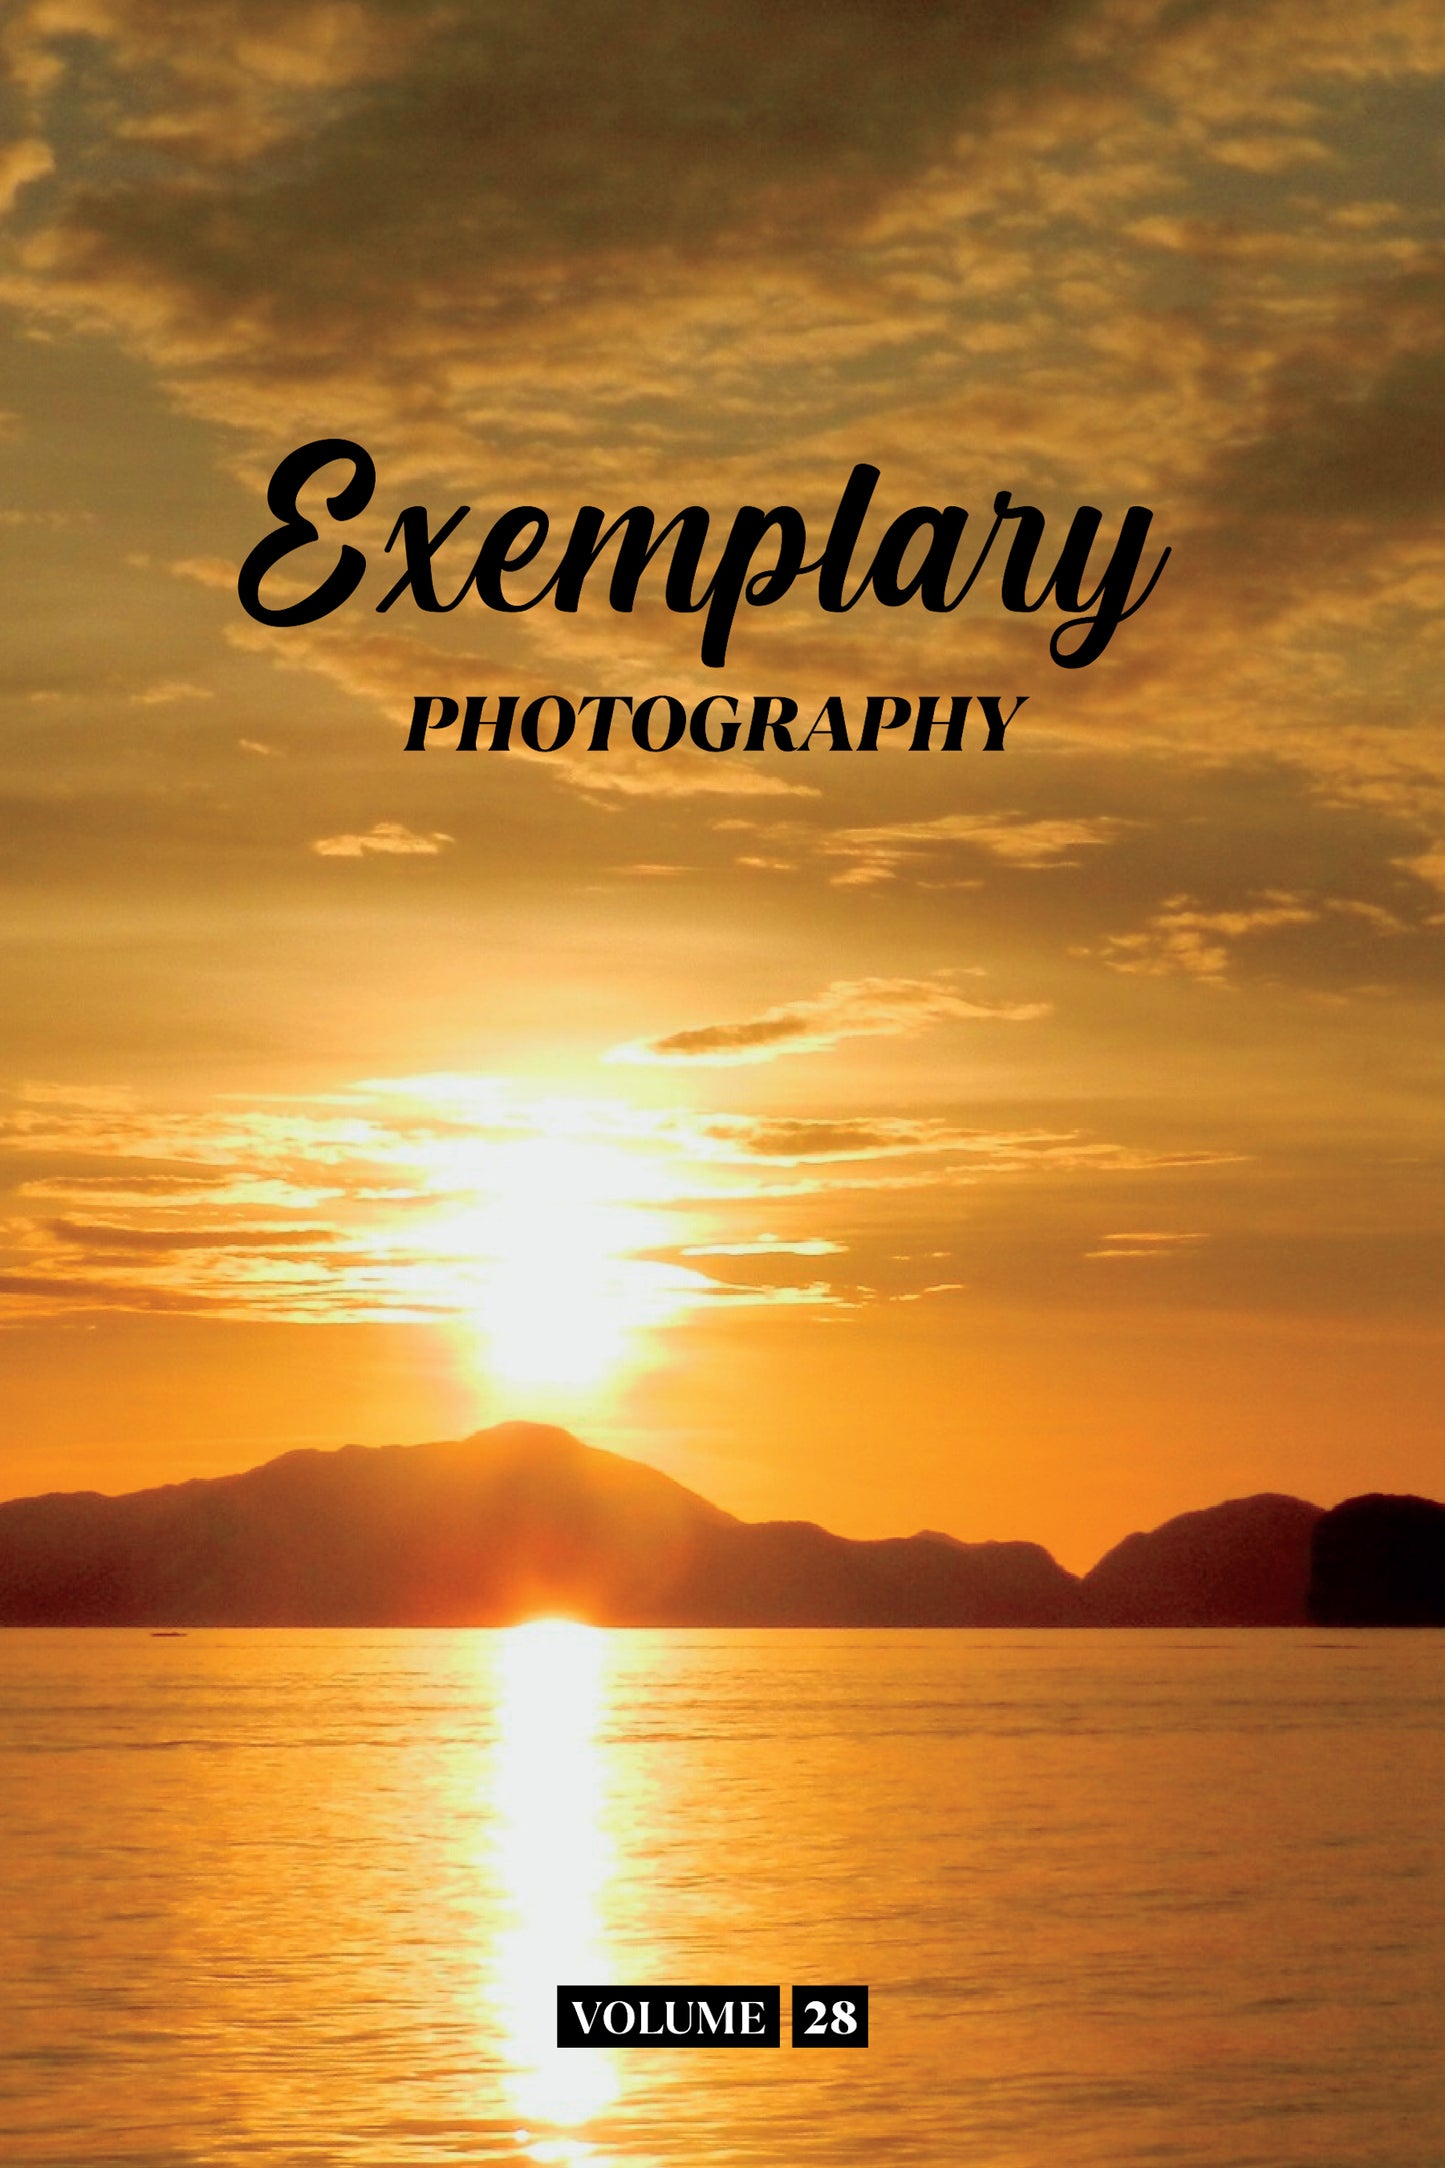 Exemplary Photography Volume 28 (Physical Book Pre-Order)